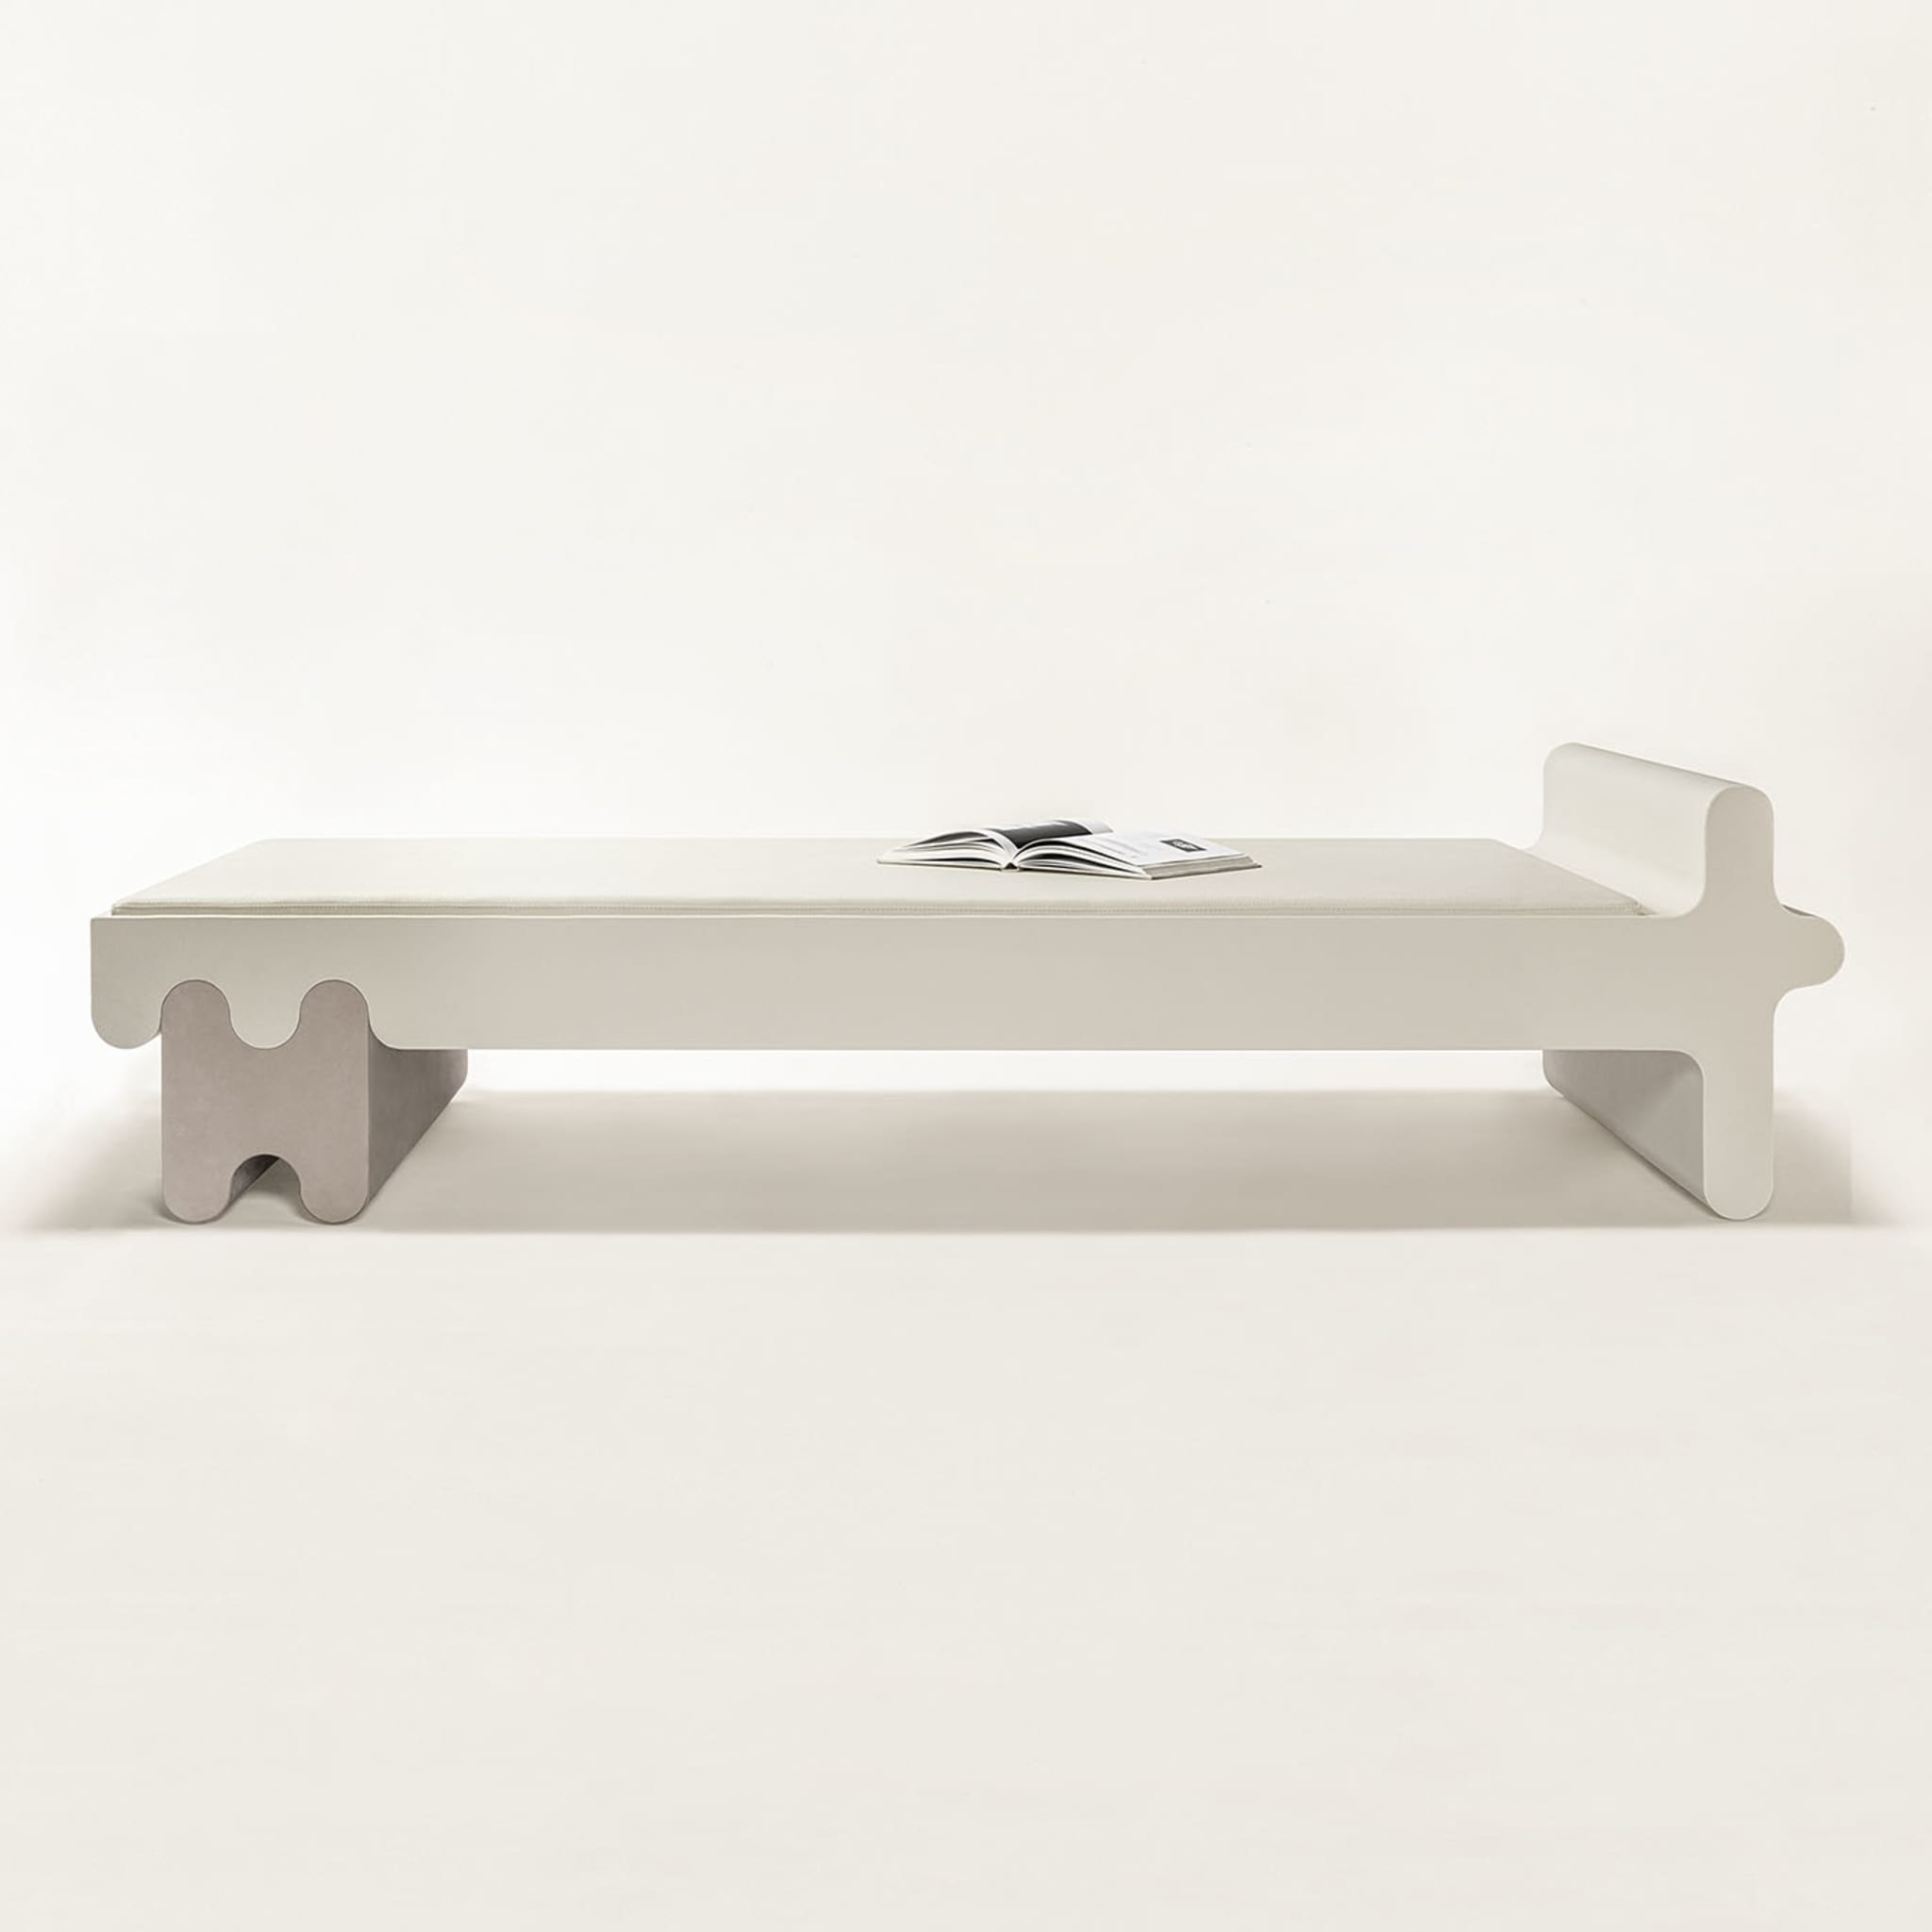 Ossicle Bench - Alternative view 1